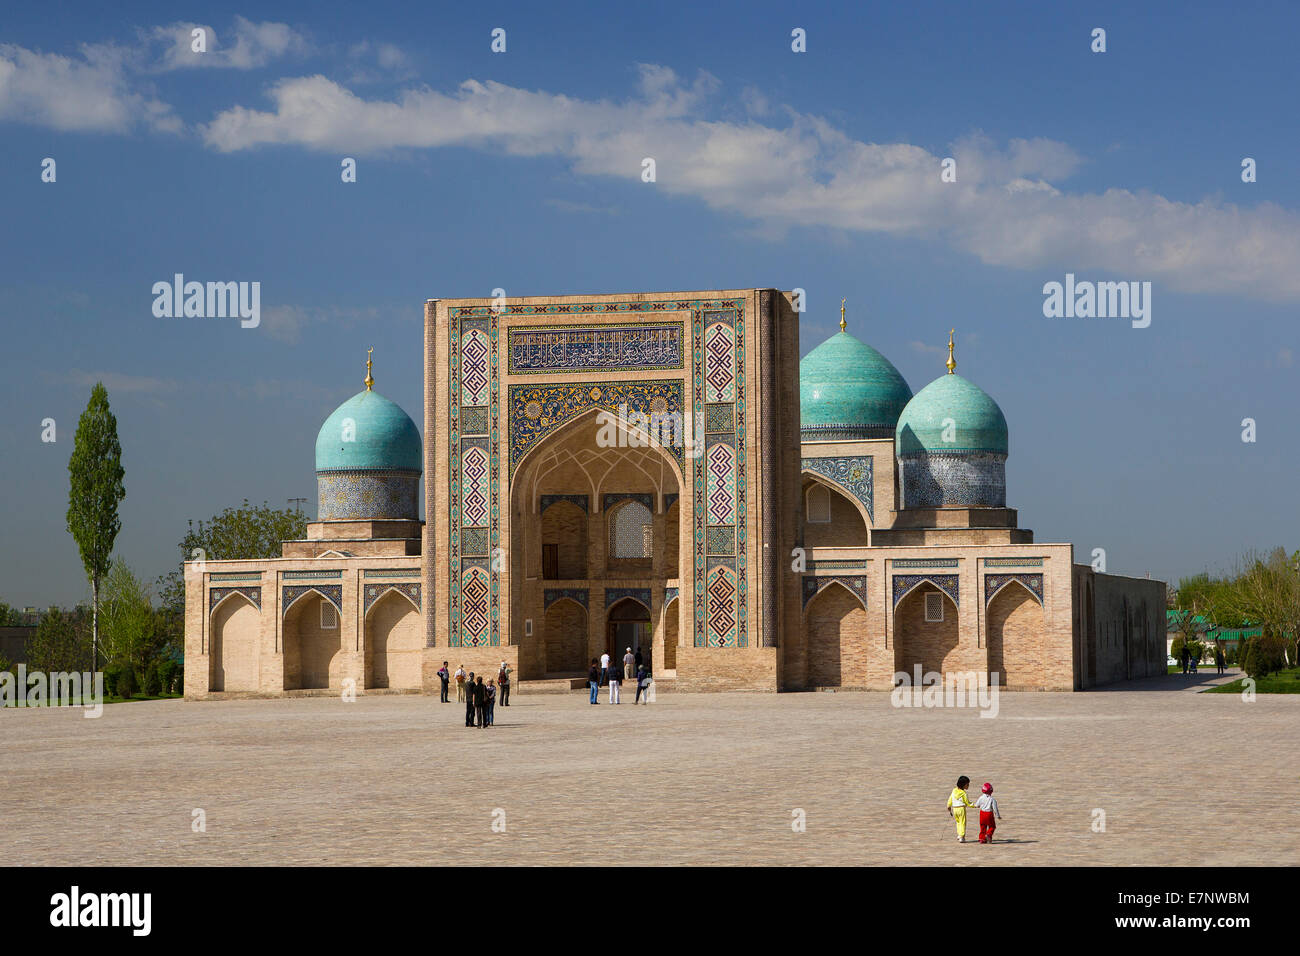 The City Of Domes Of Central Asia 28